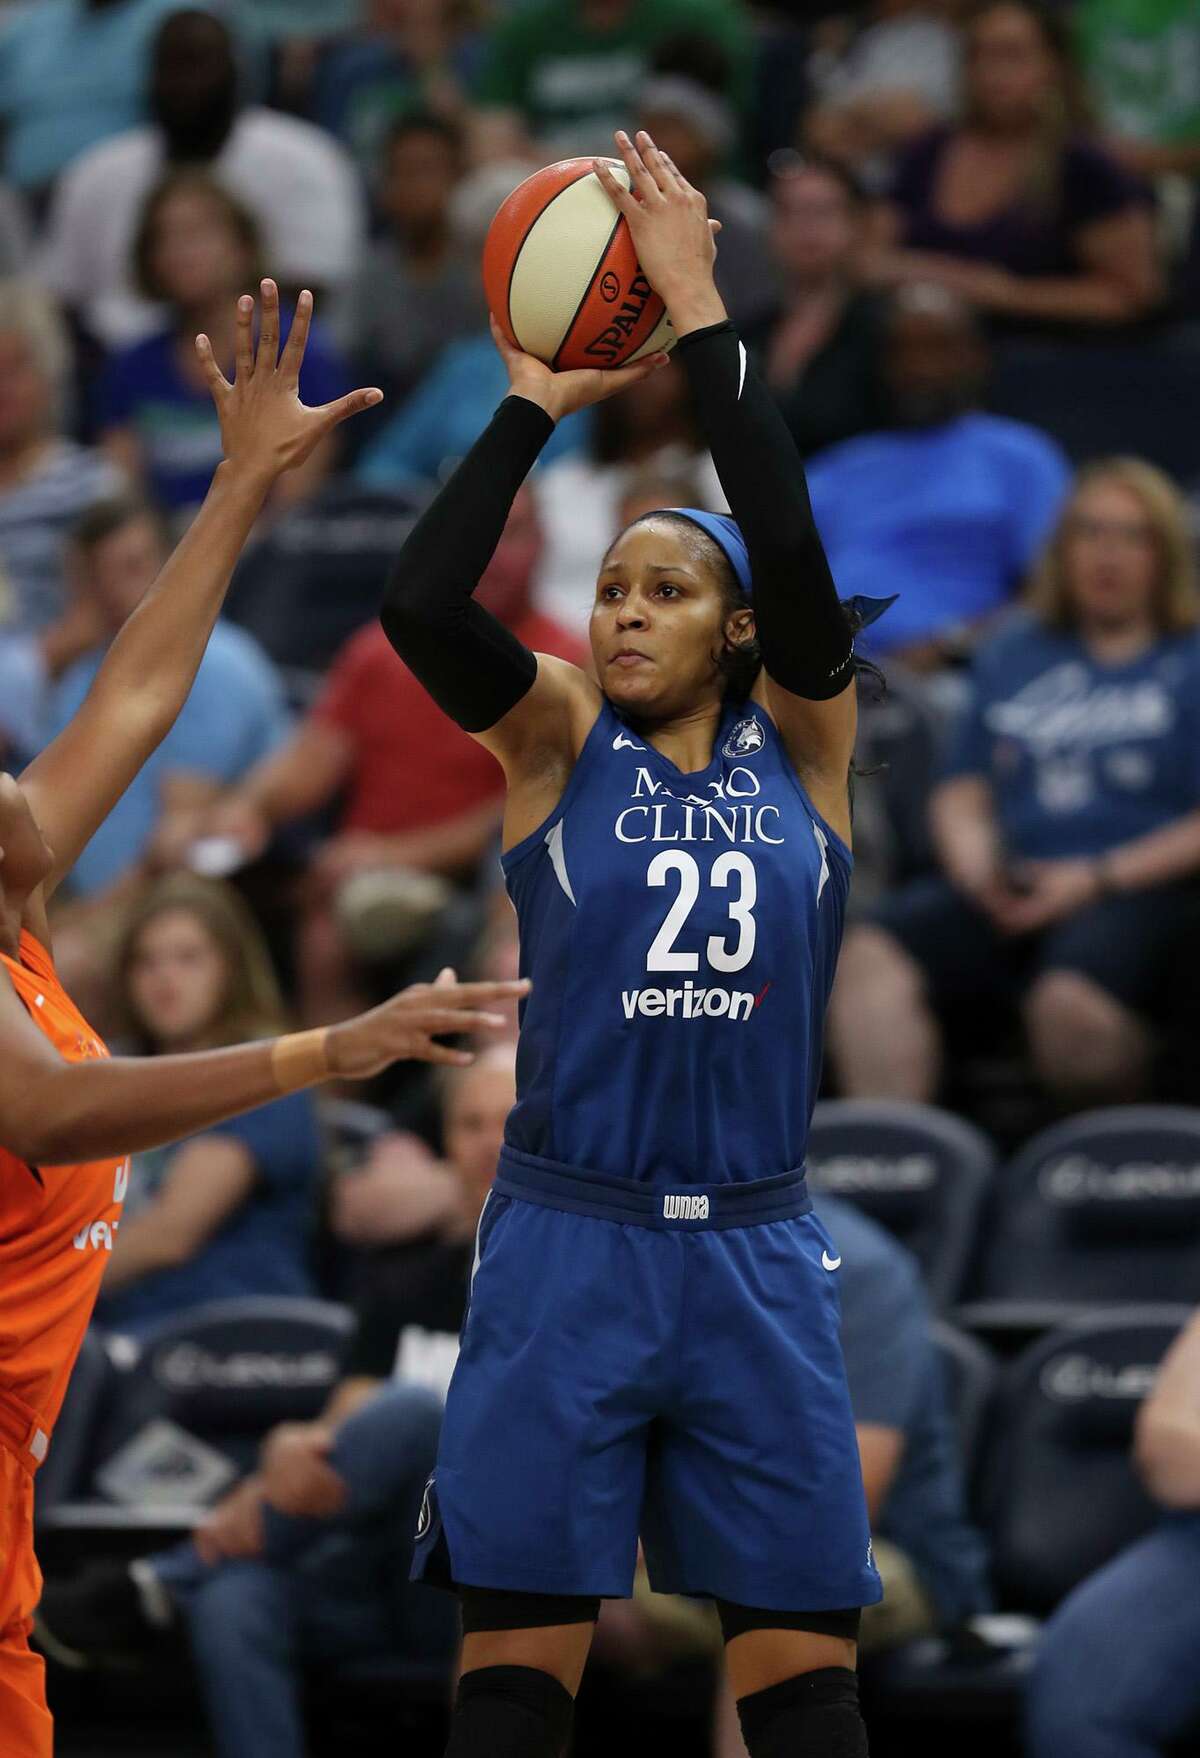 Minnesota Lynx forward Maya Moore (23) shoots in the first half against the Connecticut Sun on Sunday, July 15, 2018 at Target Center in Minneapolis, Minn. Moore announced she would sit out the 2019 WNBA season, citing her faith and goals she wants to accomplish. (Jeff Wheeler/Minneapolis Star Tribune/TNS)